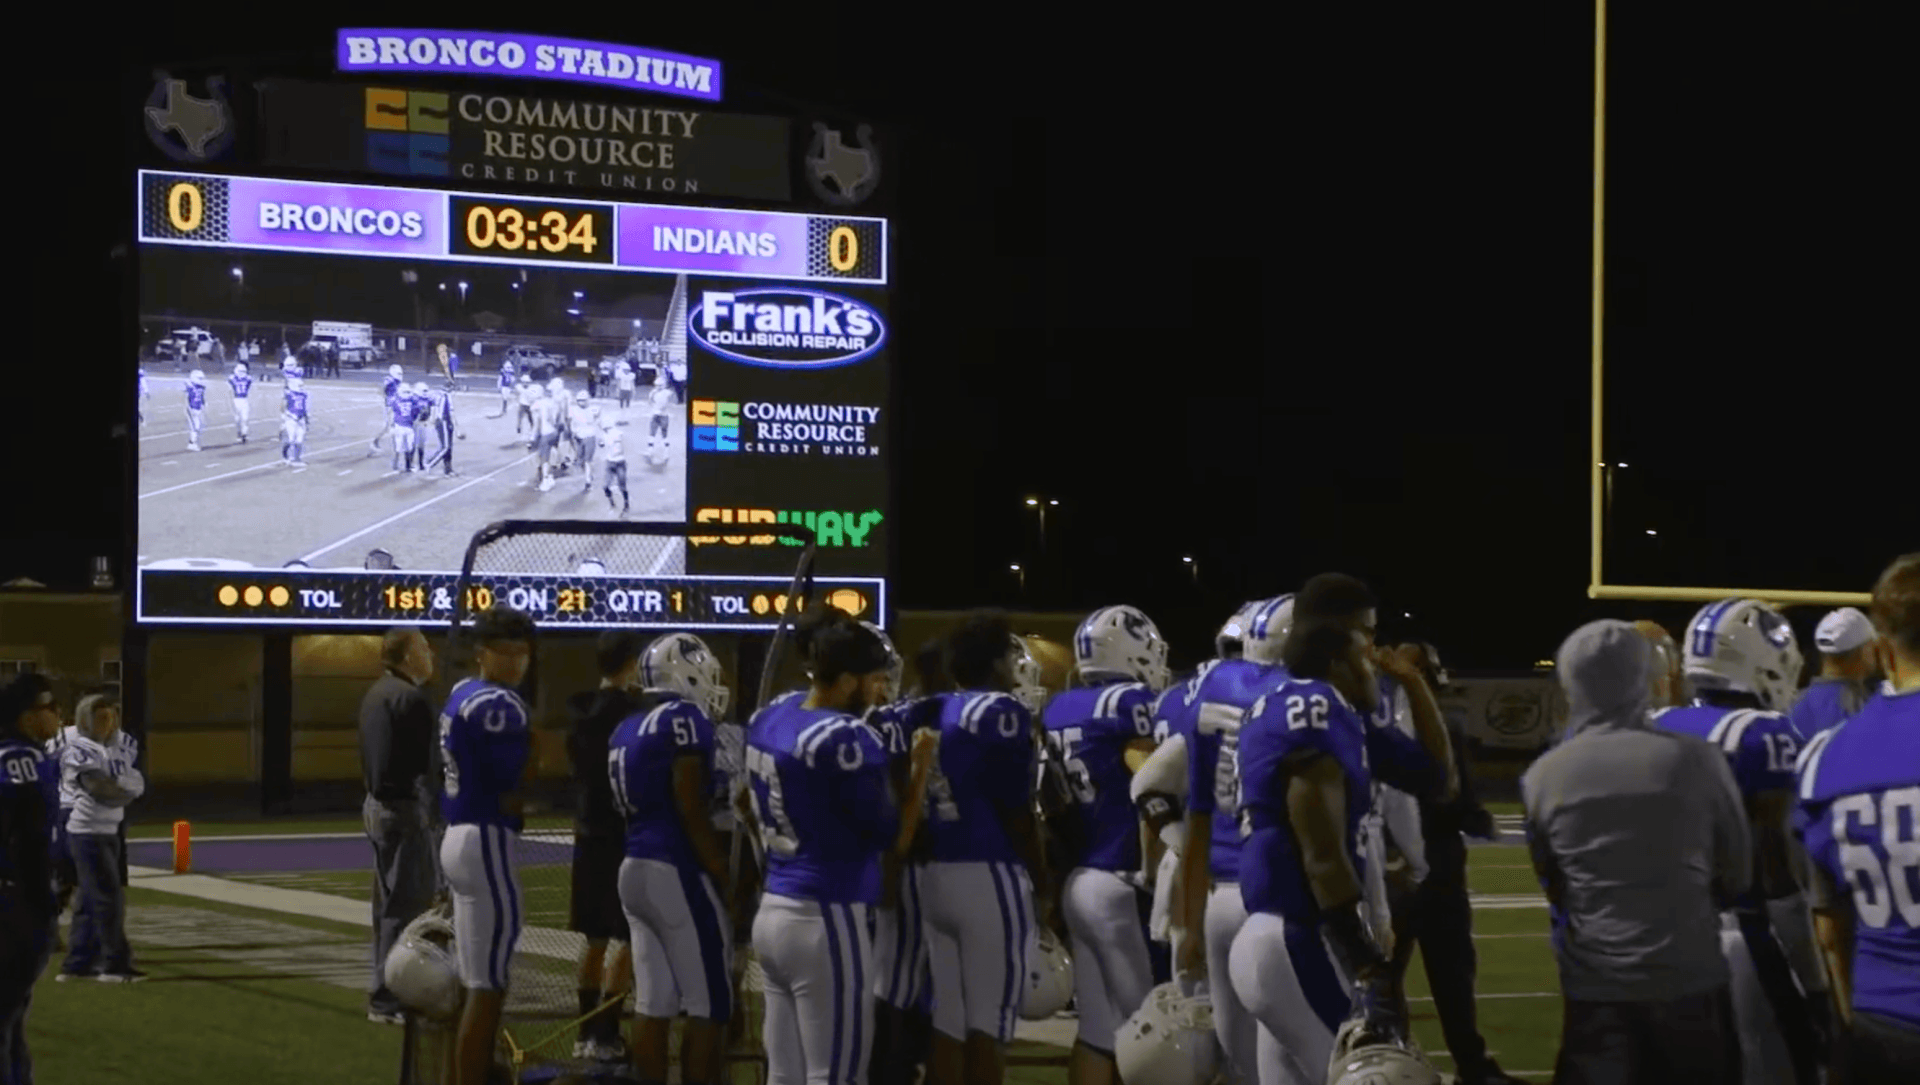 image of football players and the scoreboard